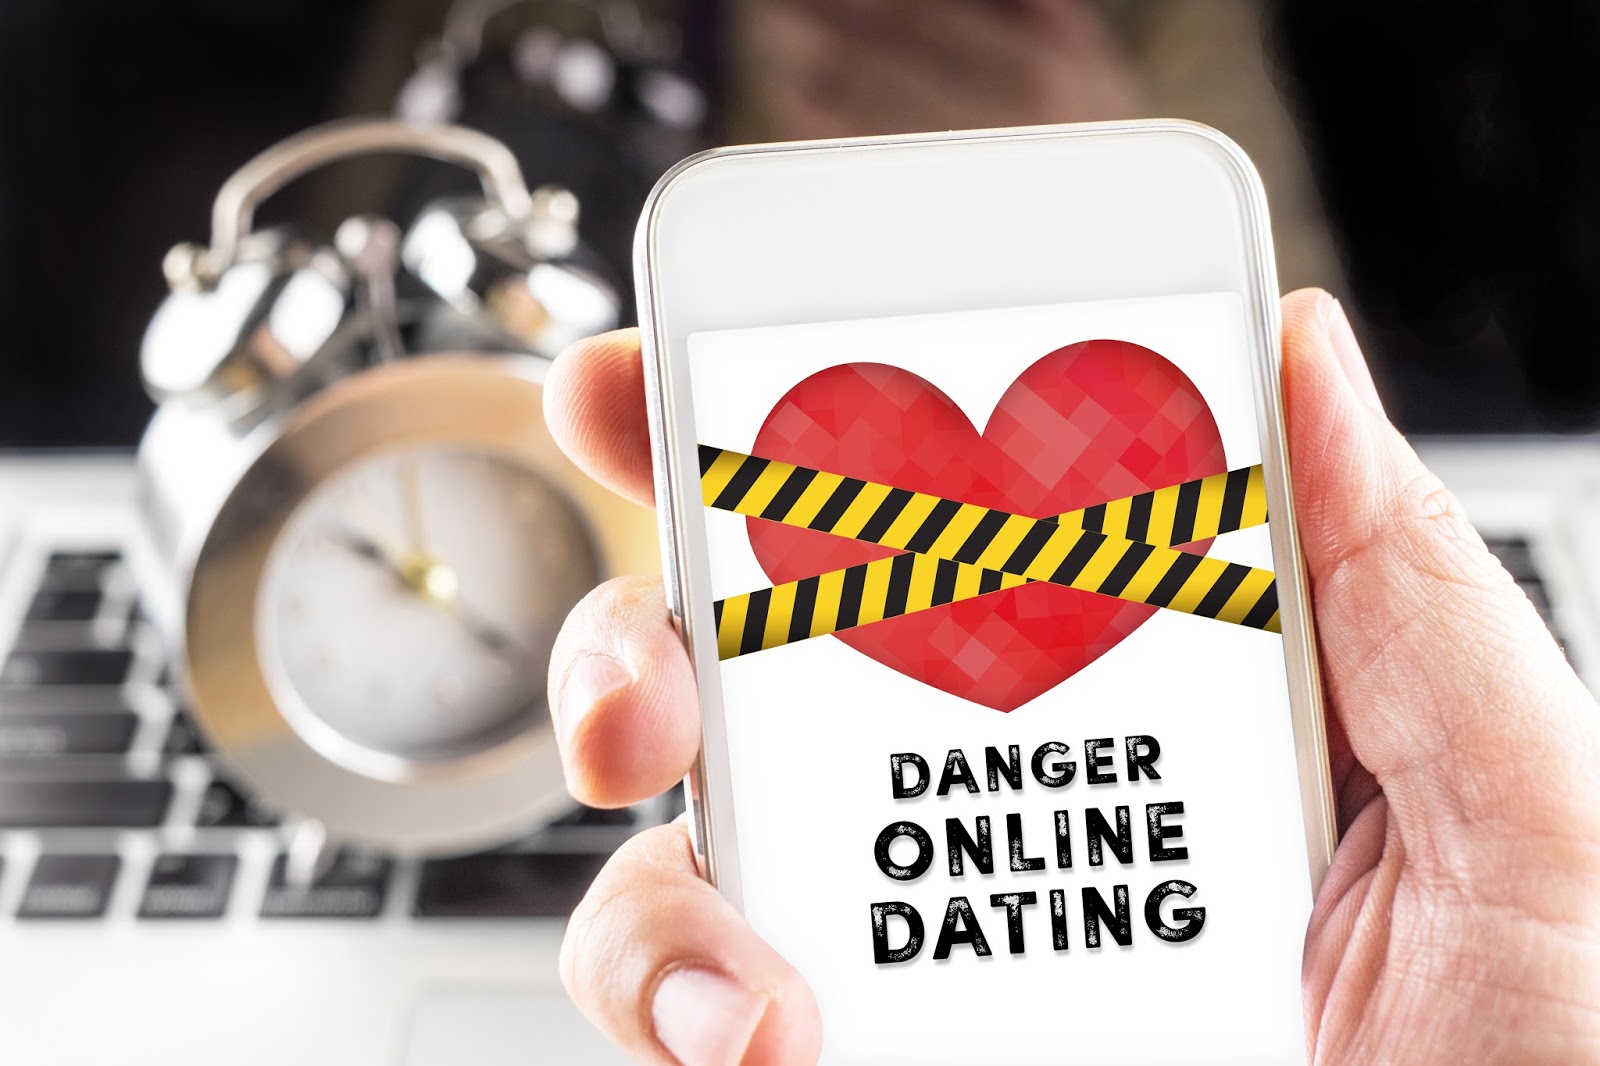 No photos romance up dating sites scammer -0 sign BBB: Beware